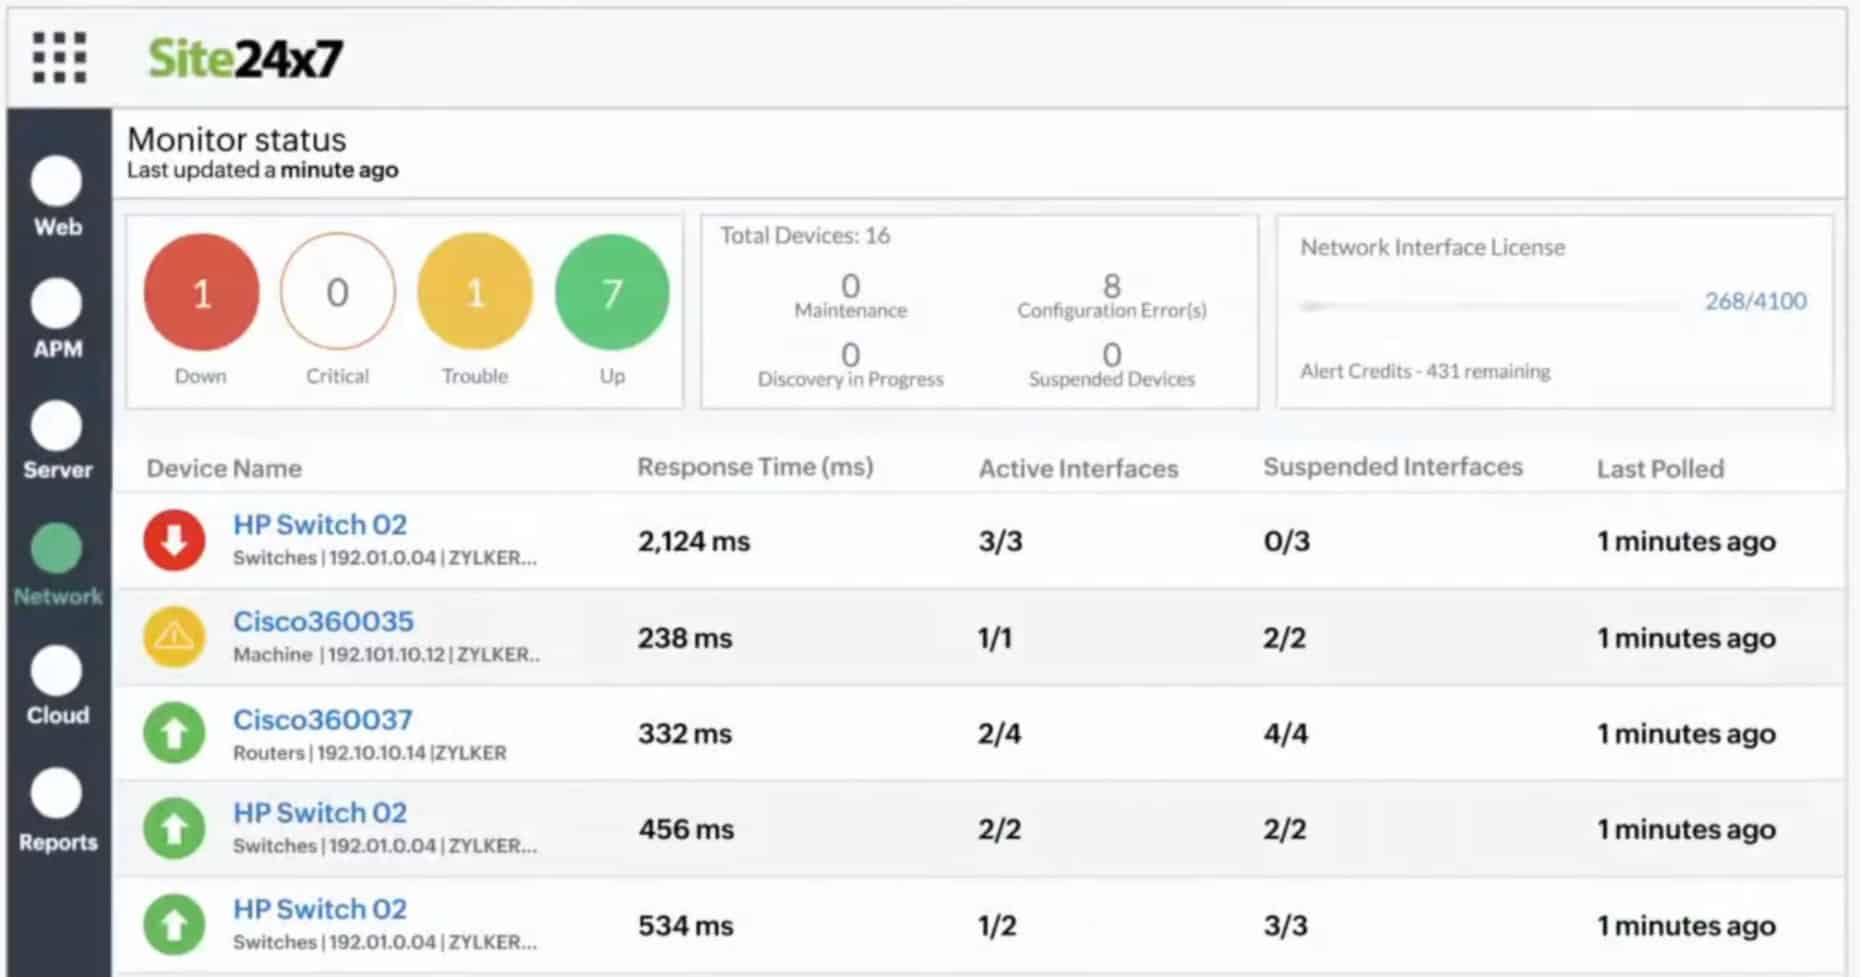 Site24x7 Network Monitoring Tool